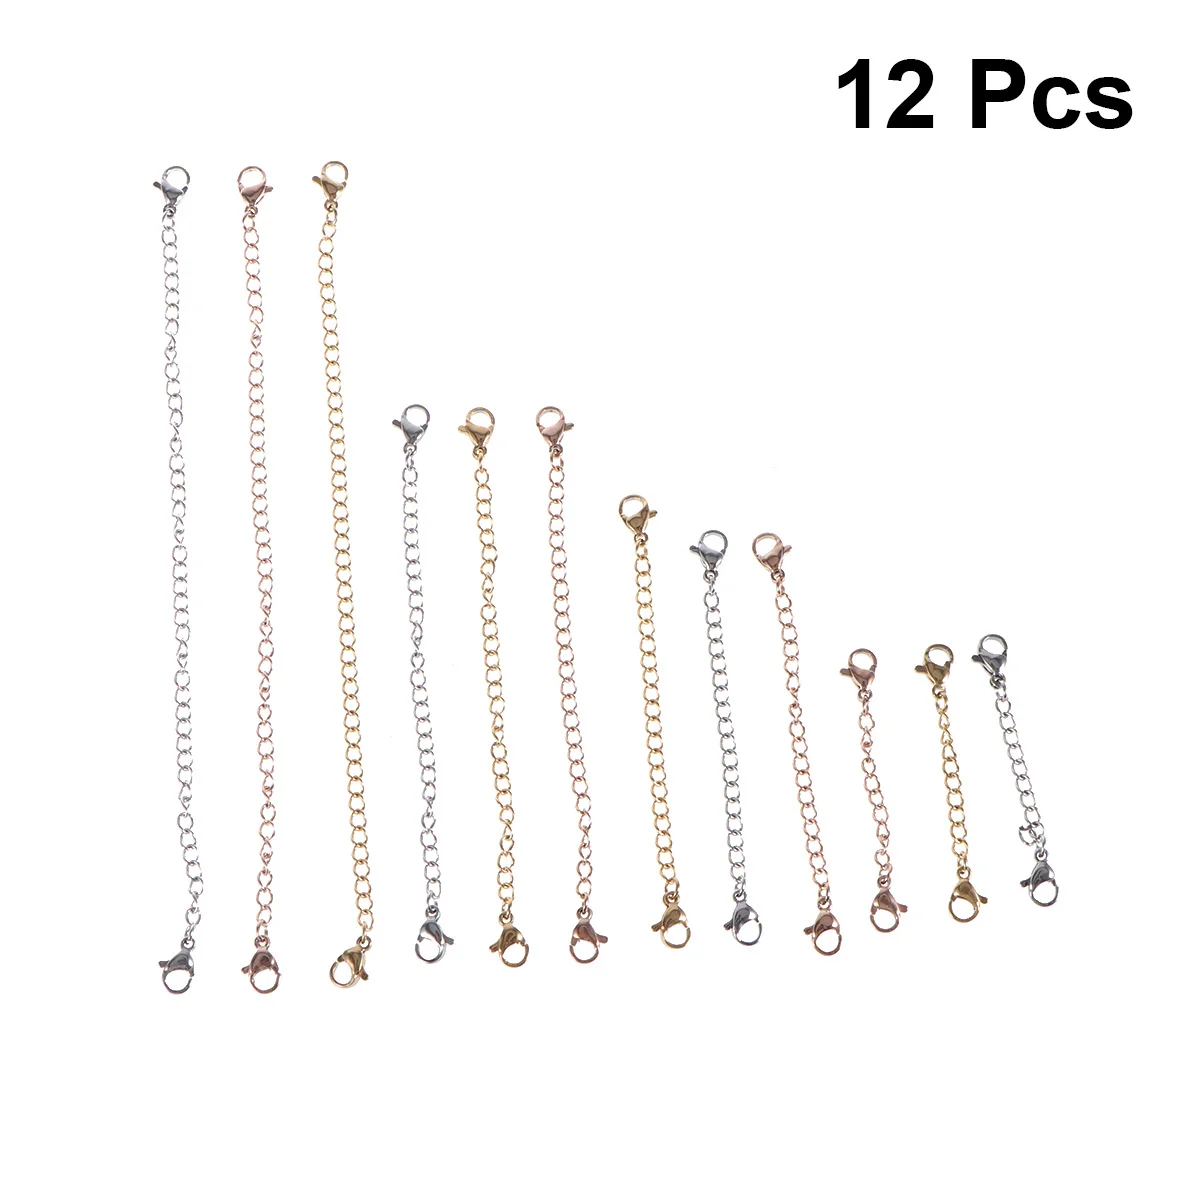 

12PCS Stainless Steel Lobster Buckle Necklace Extension Chain with Lobster Clasp at Both Ends for DIY Jewelry Making Silver